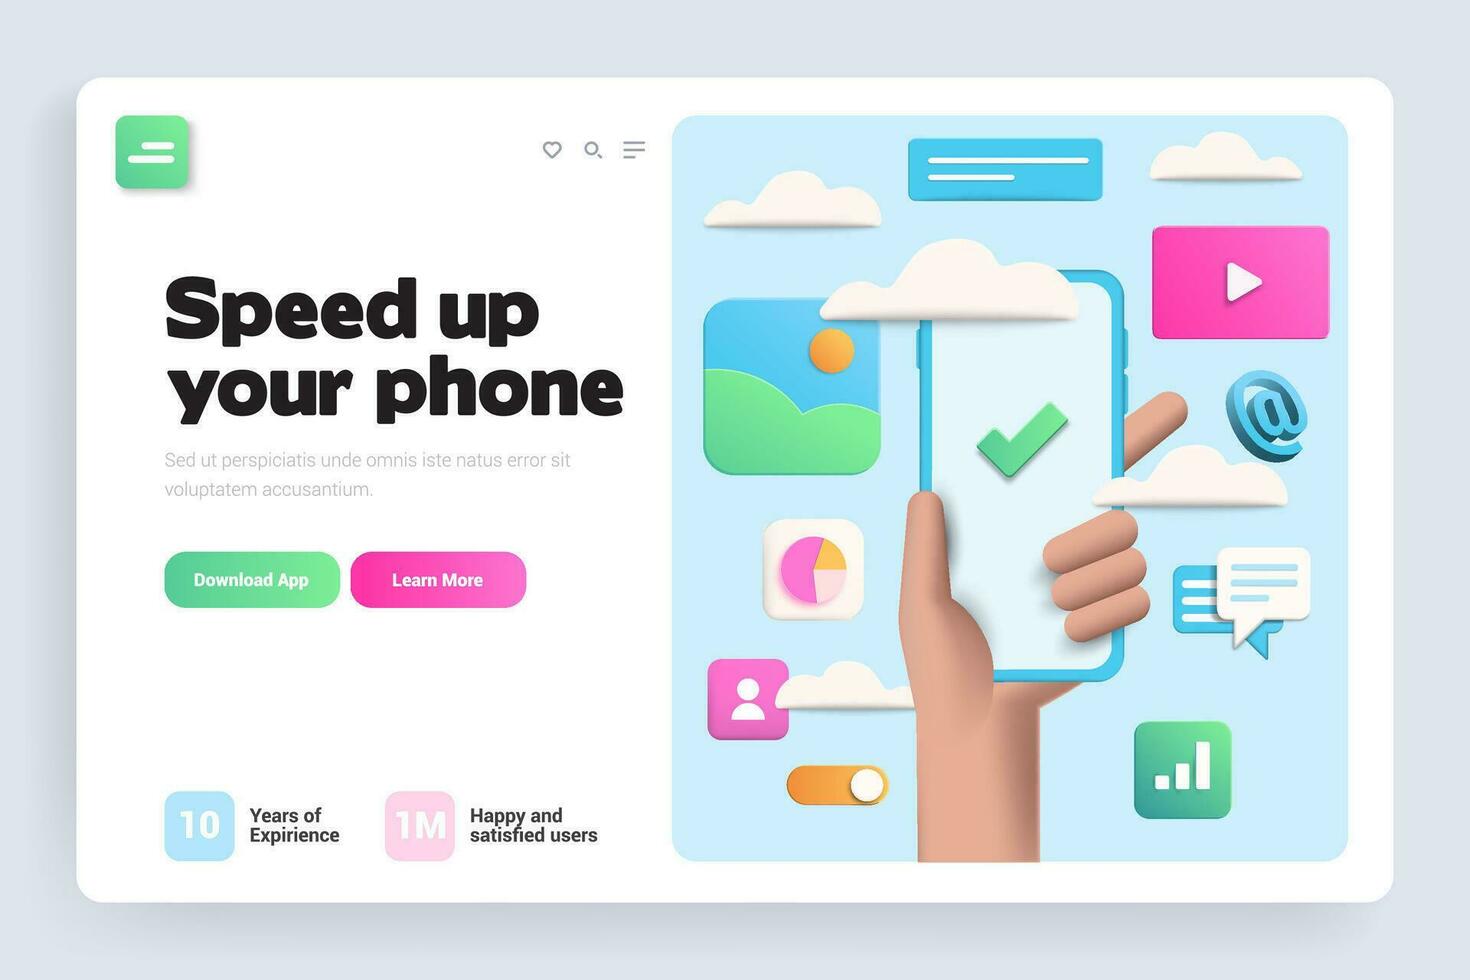 Speed up your phone landing page vector